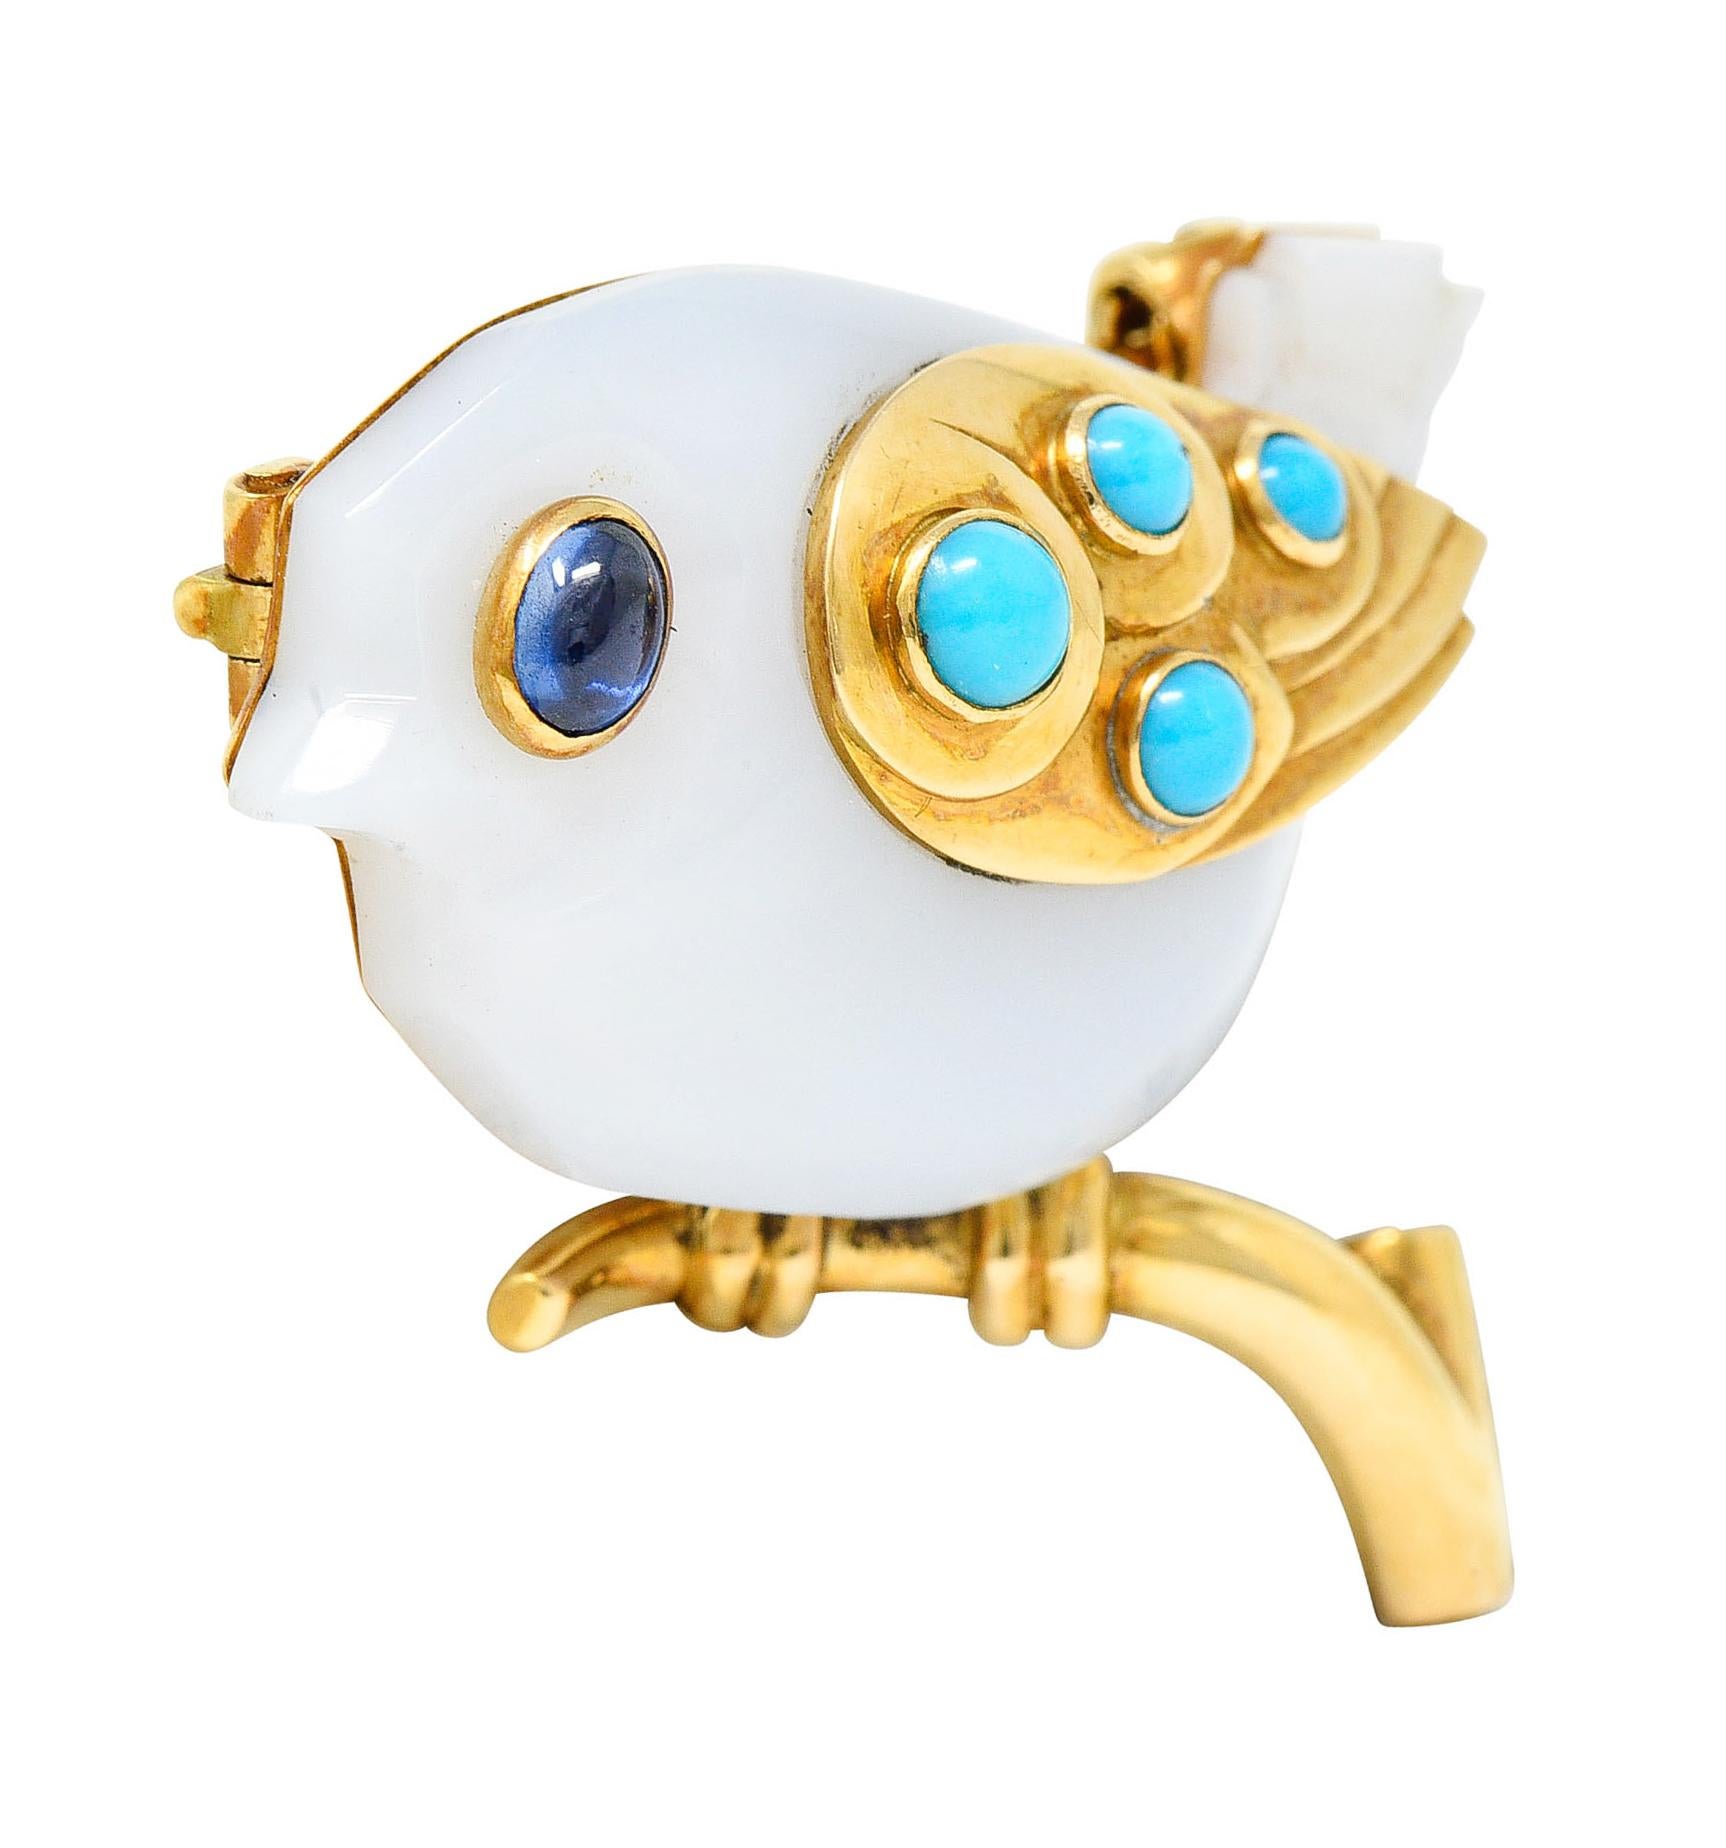 Designed as a stylized bird perched on a polished gold branch

Body is comprised of carved chalcedony - translucent and very light blue in color

With a gold wing accented by bezel set turquoise cabochons - brightly colored and well matched

Eye is